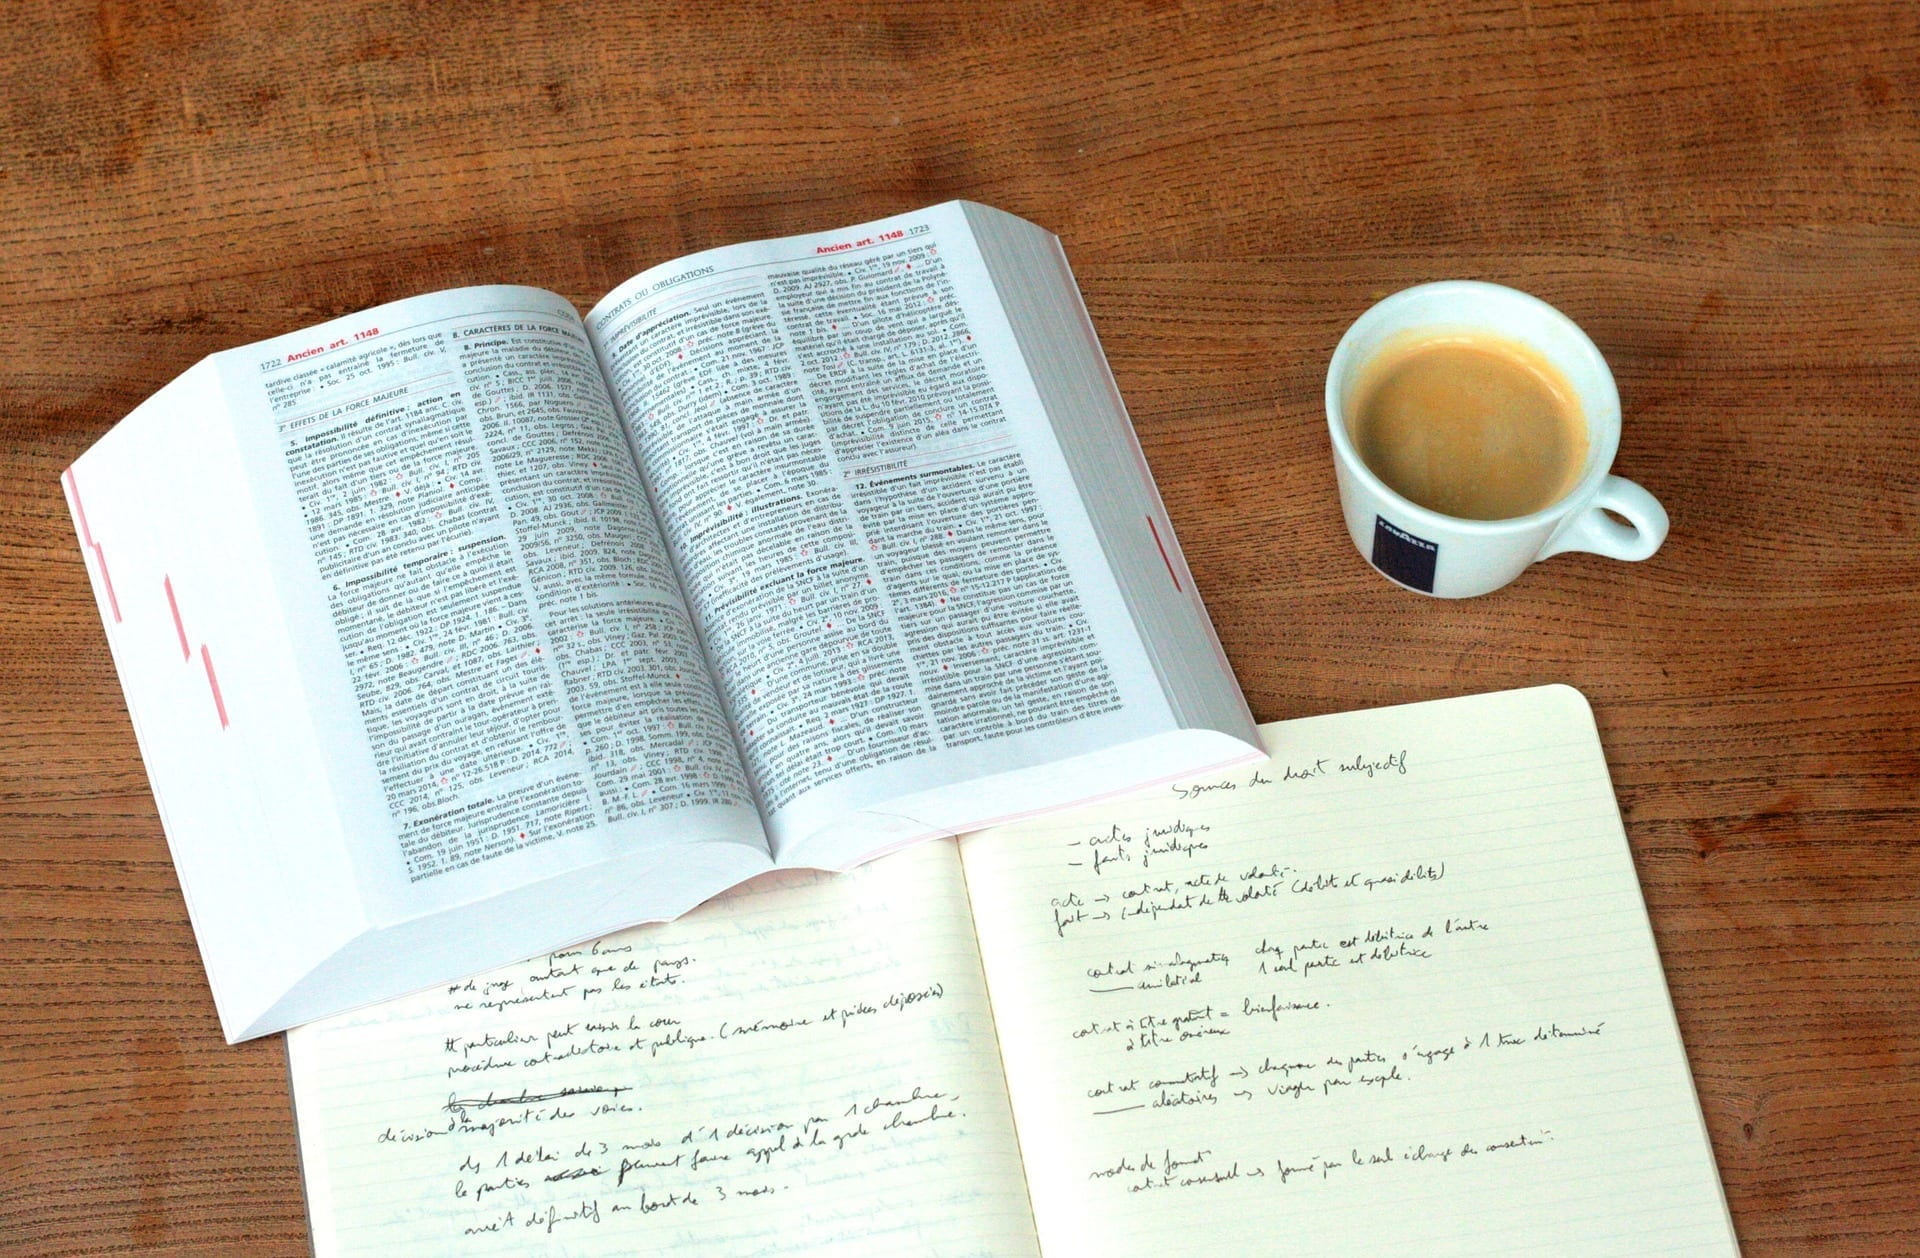 Open text book, notebook and a cup of coffee.